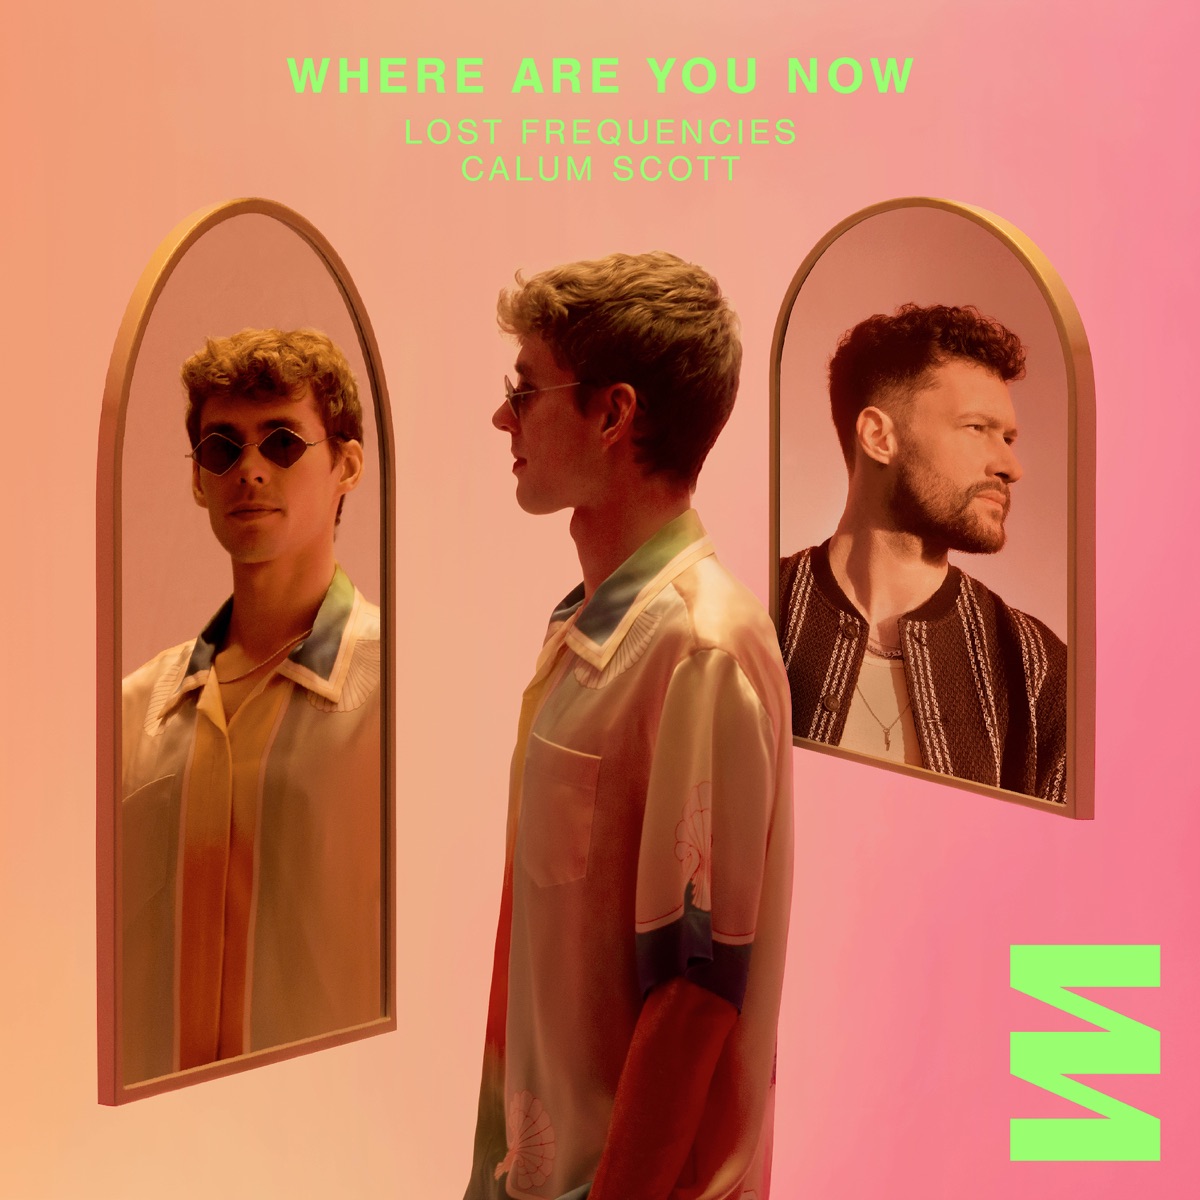 Lost Frequencies & Calum Scott - Where Are You Now - Single